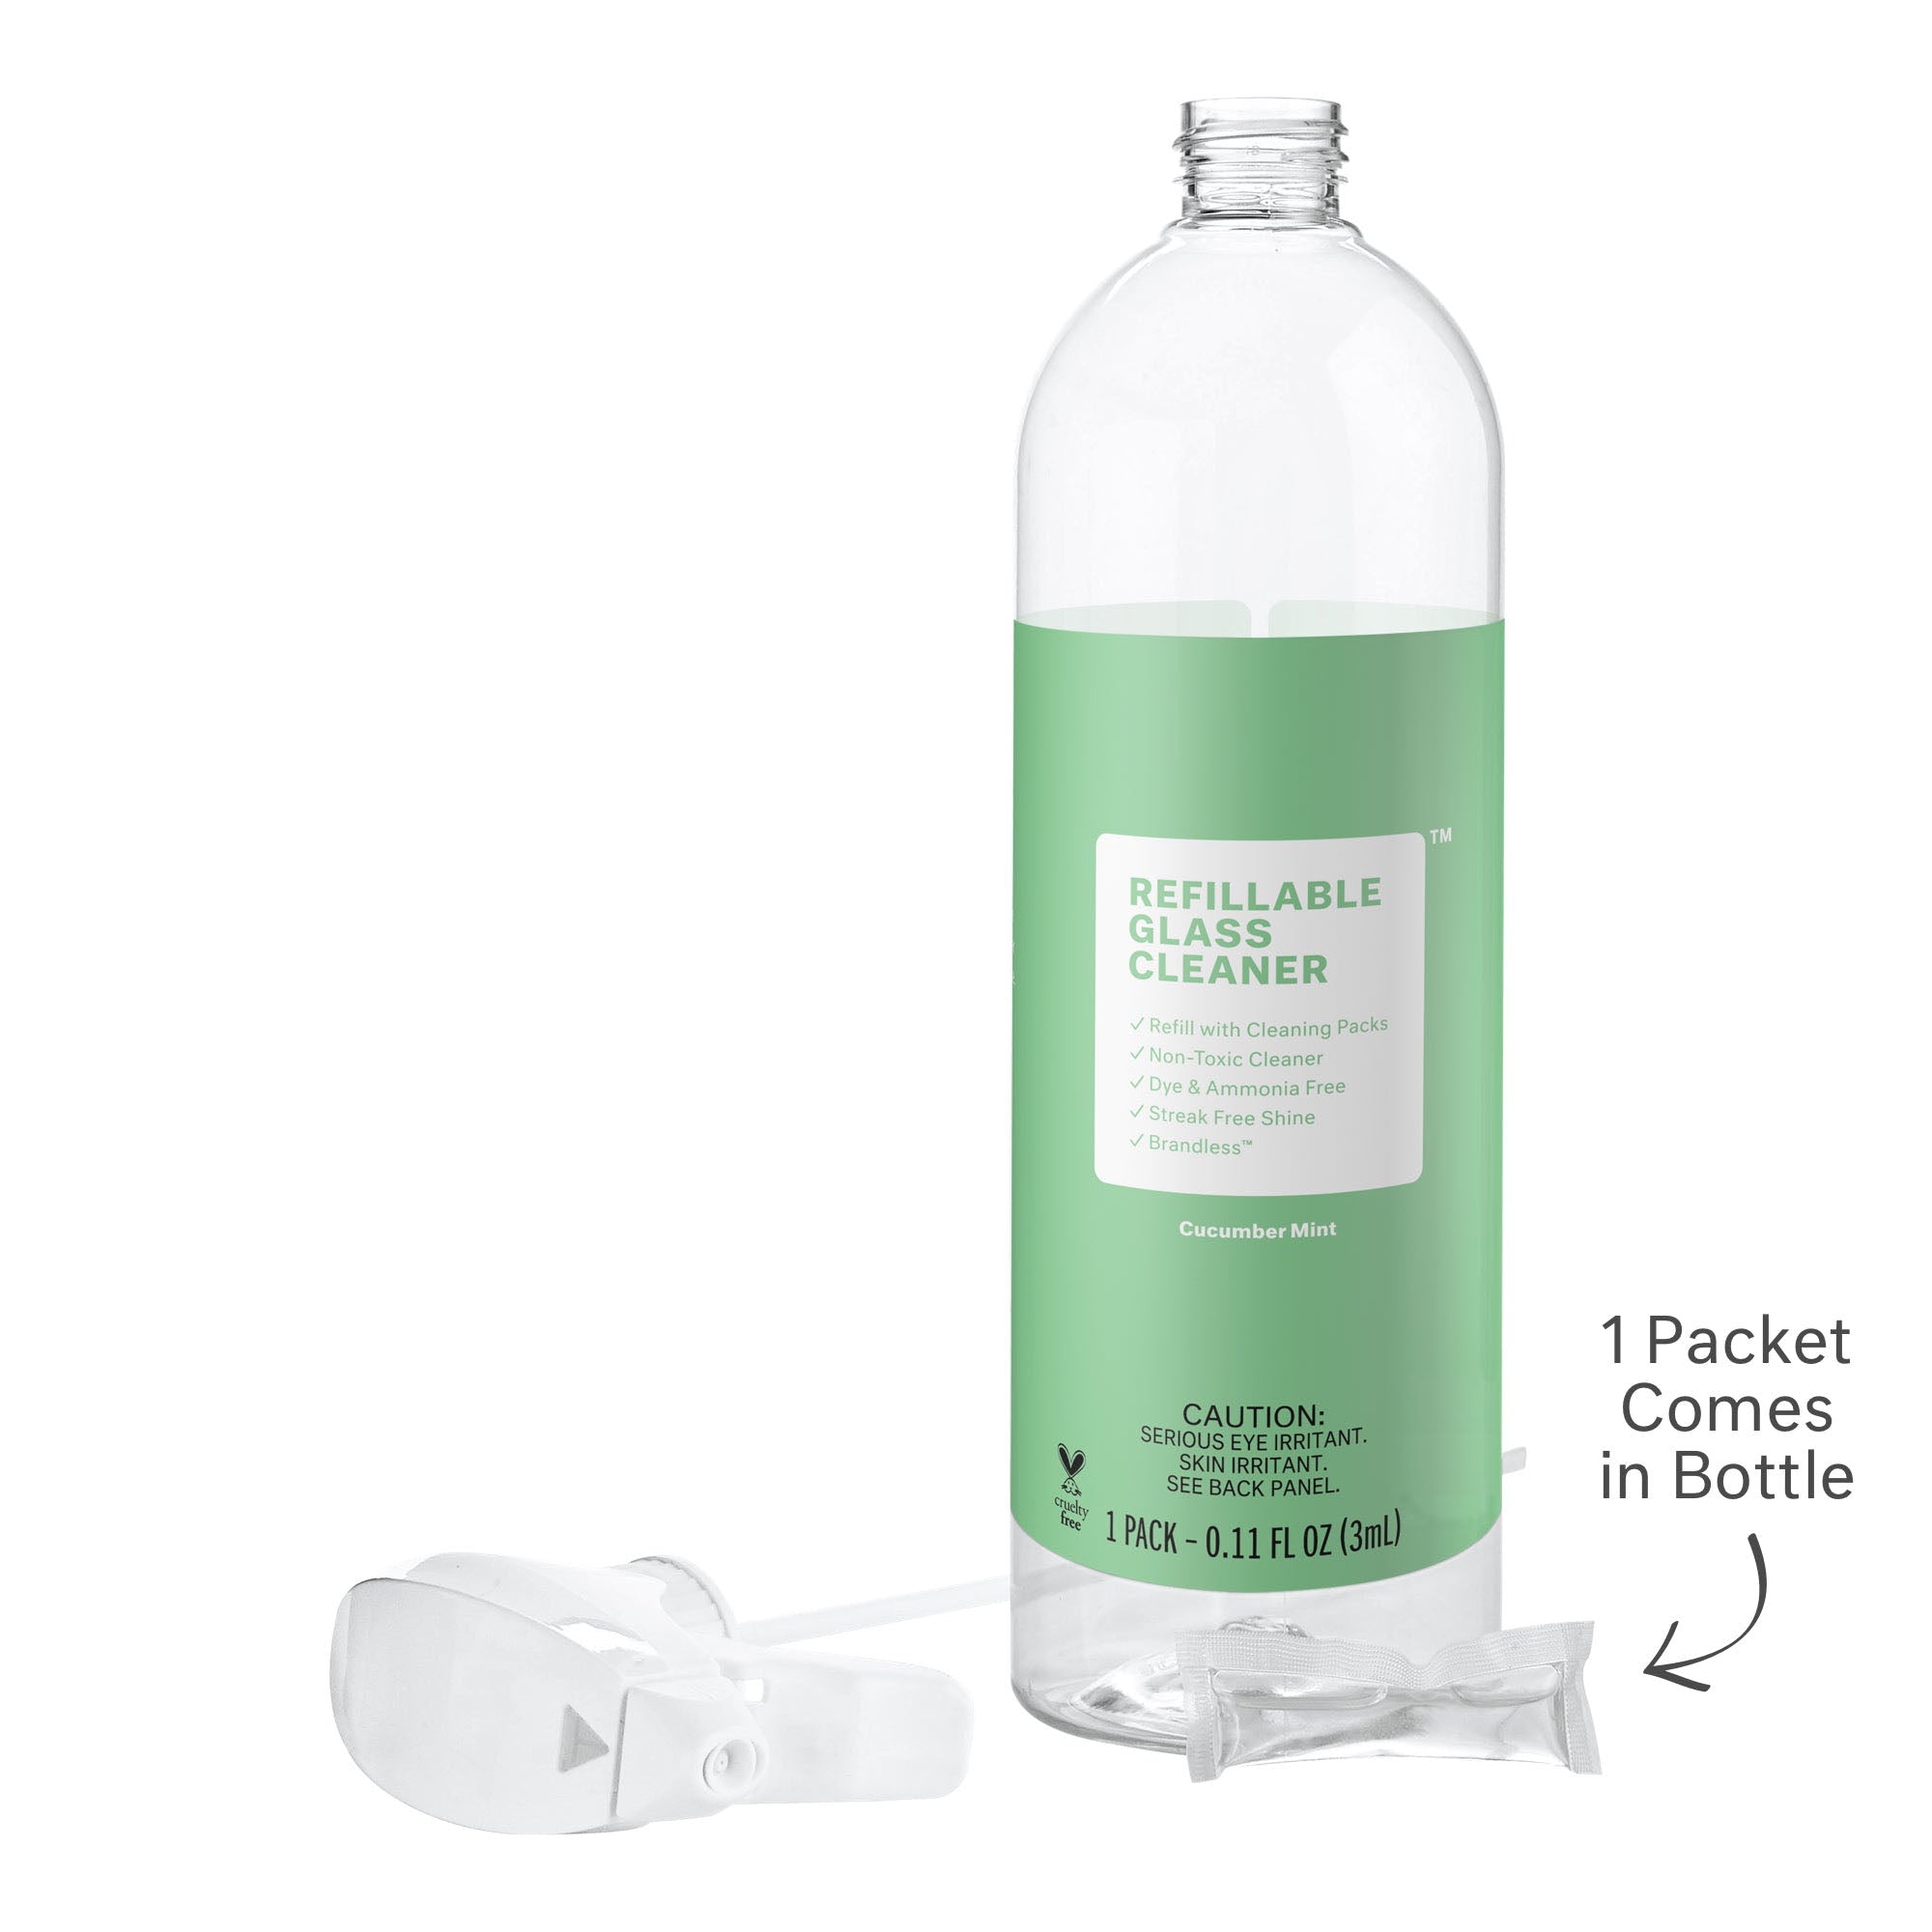 Cucumber mint spray bottle front view with visual of refill packet